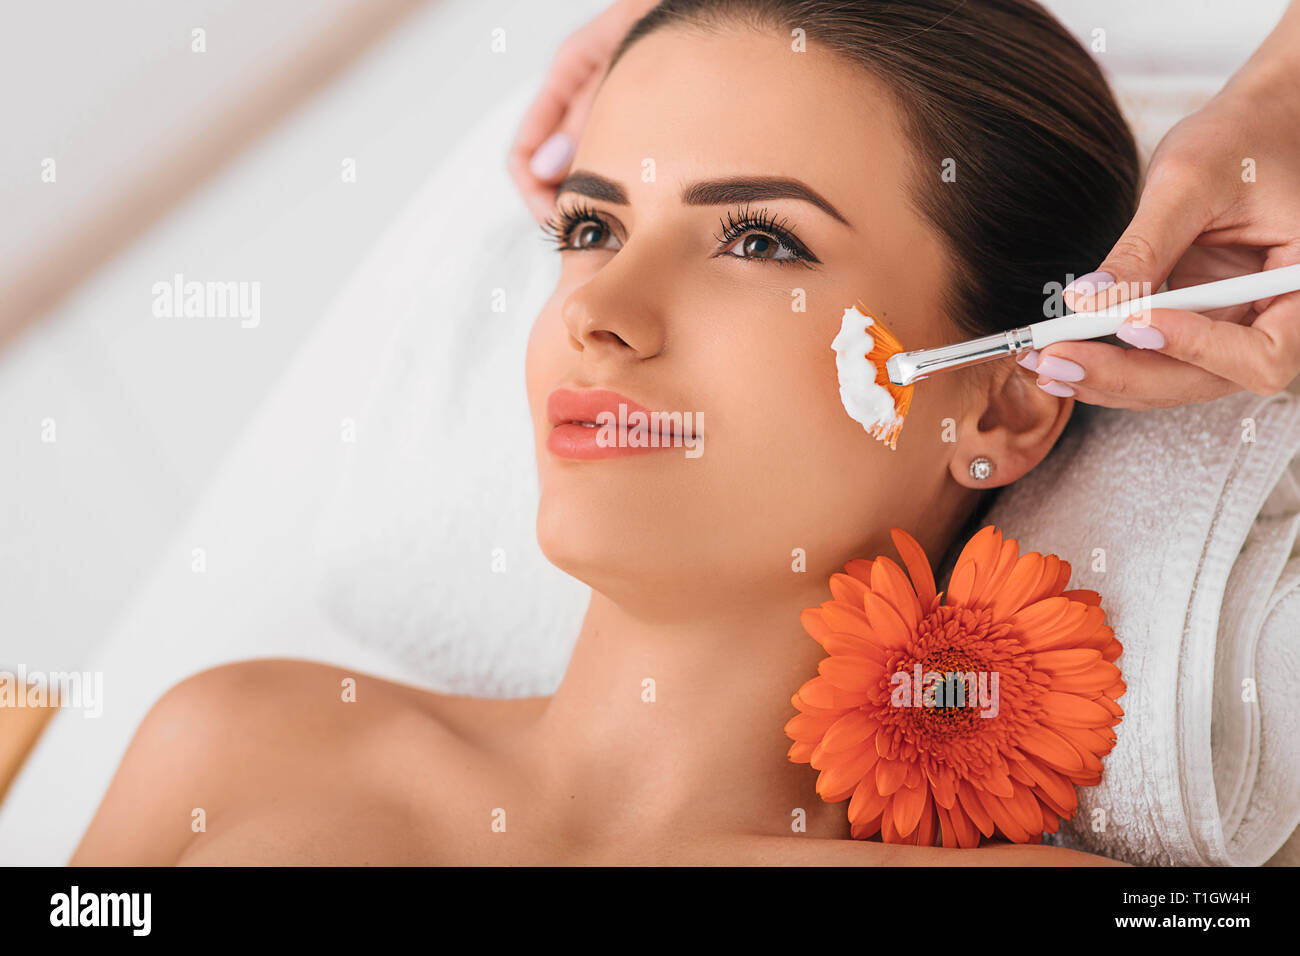 Pretty woman is getting a face mask Stock Photo